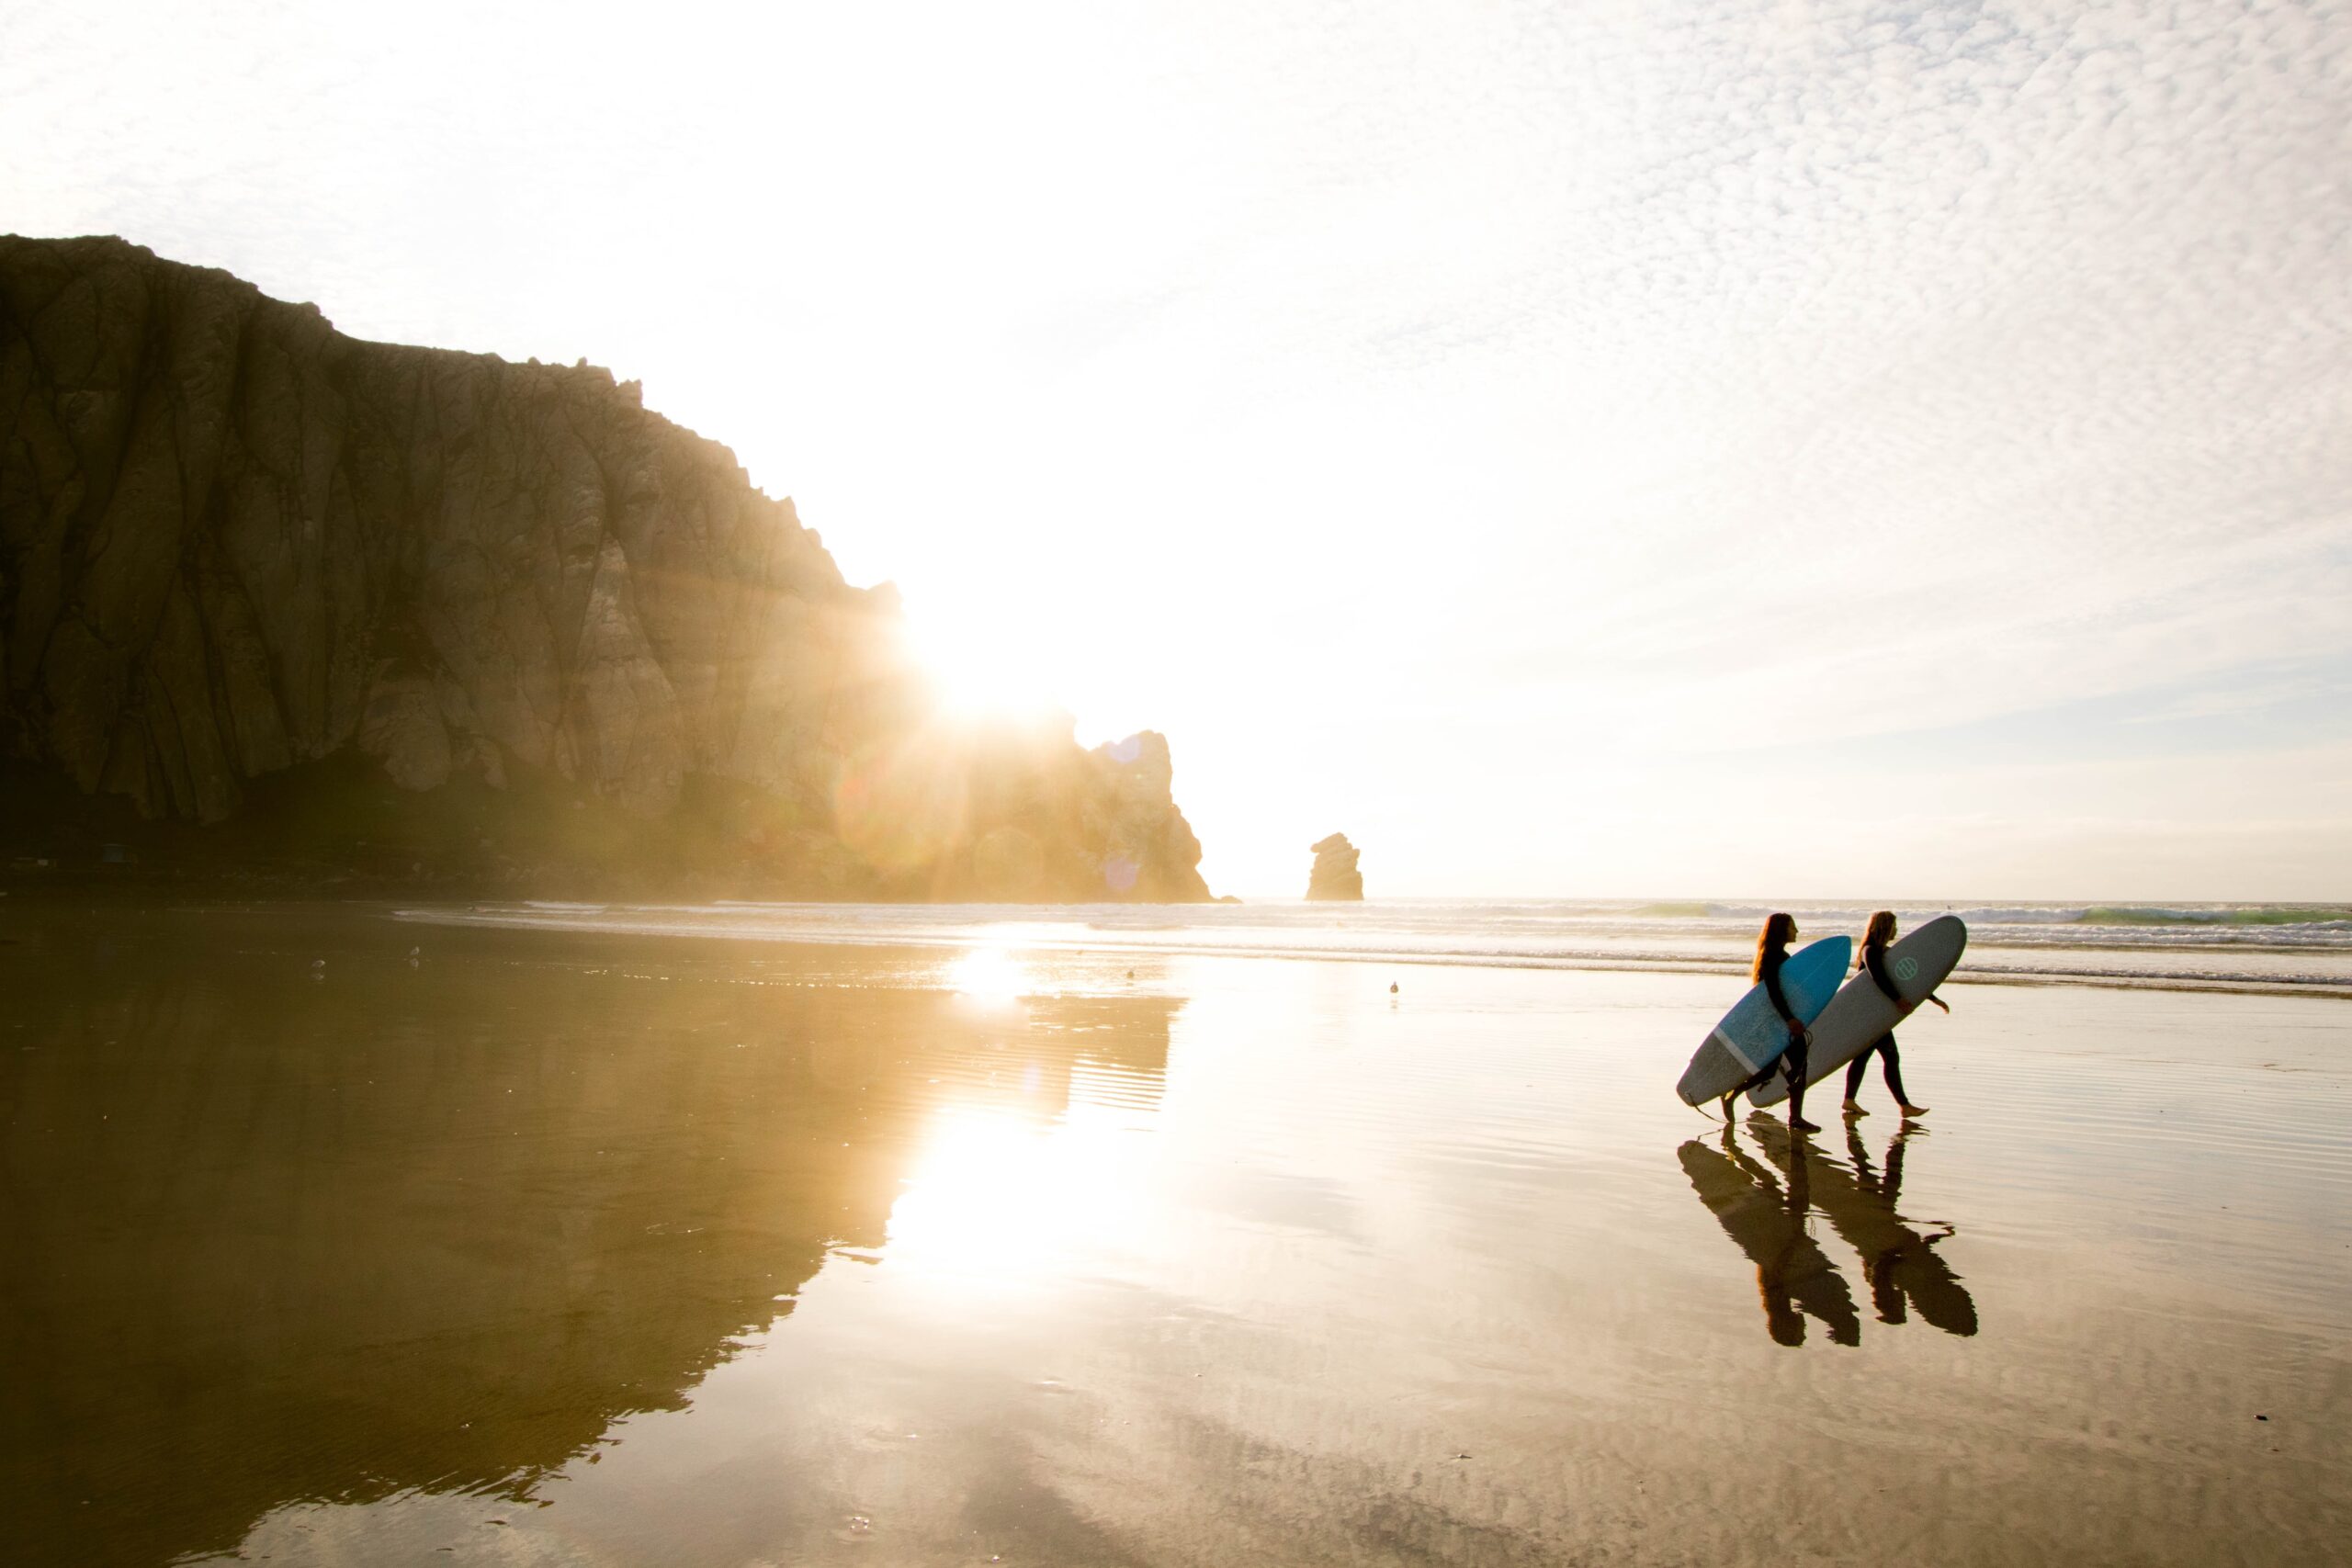 two people carrying surfboards walking a California beach